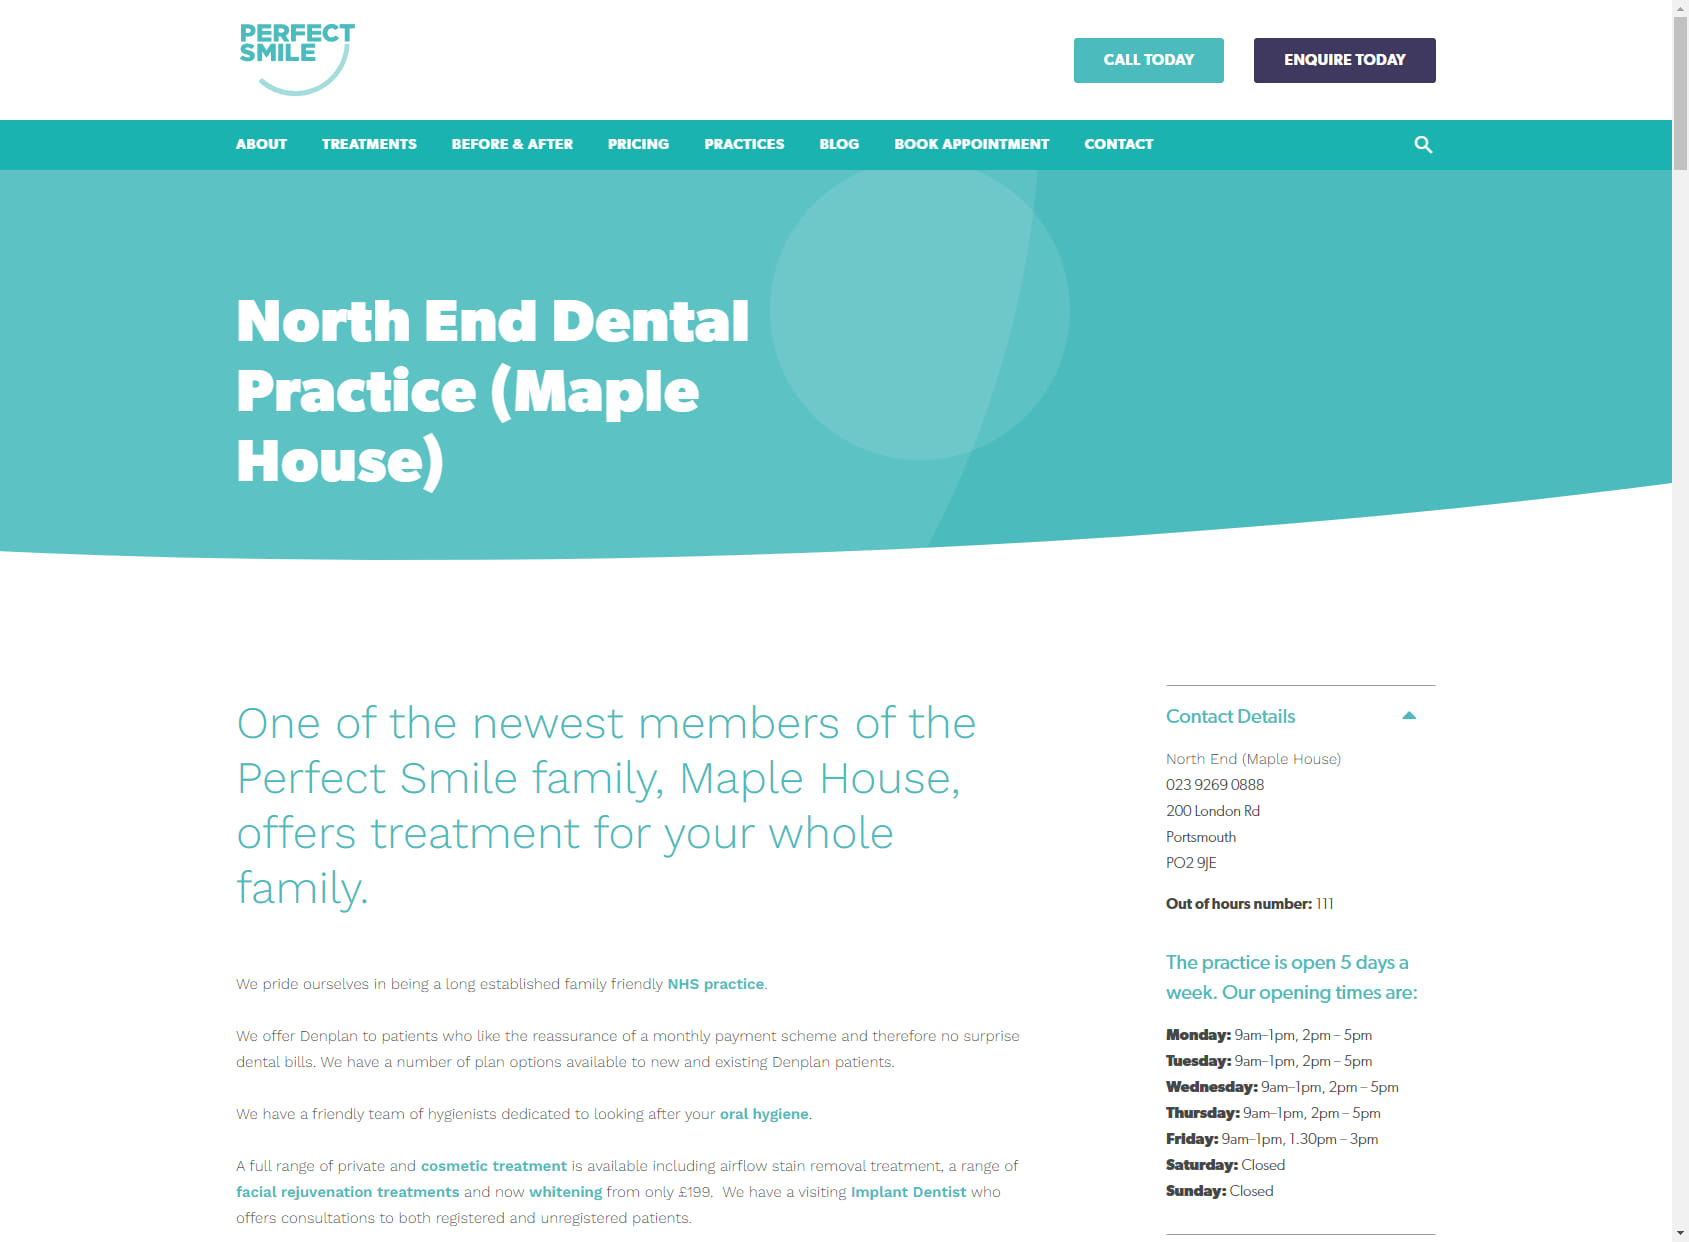 Perfect Smile Dental - North End